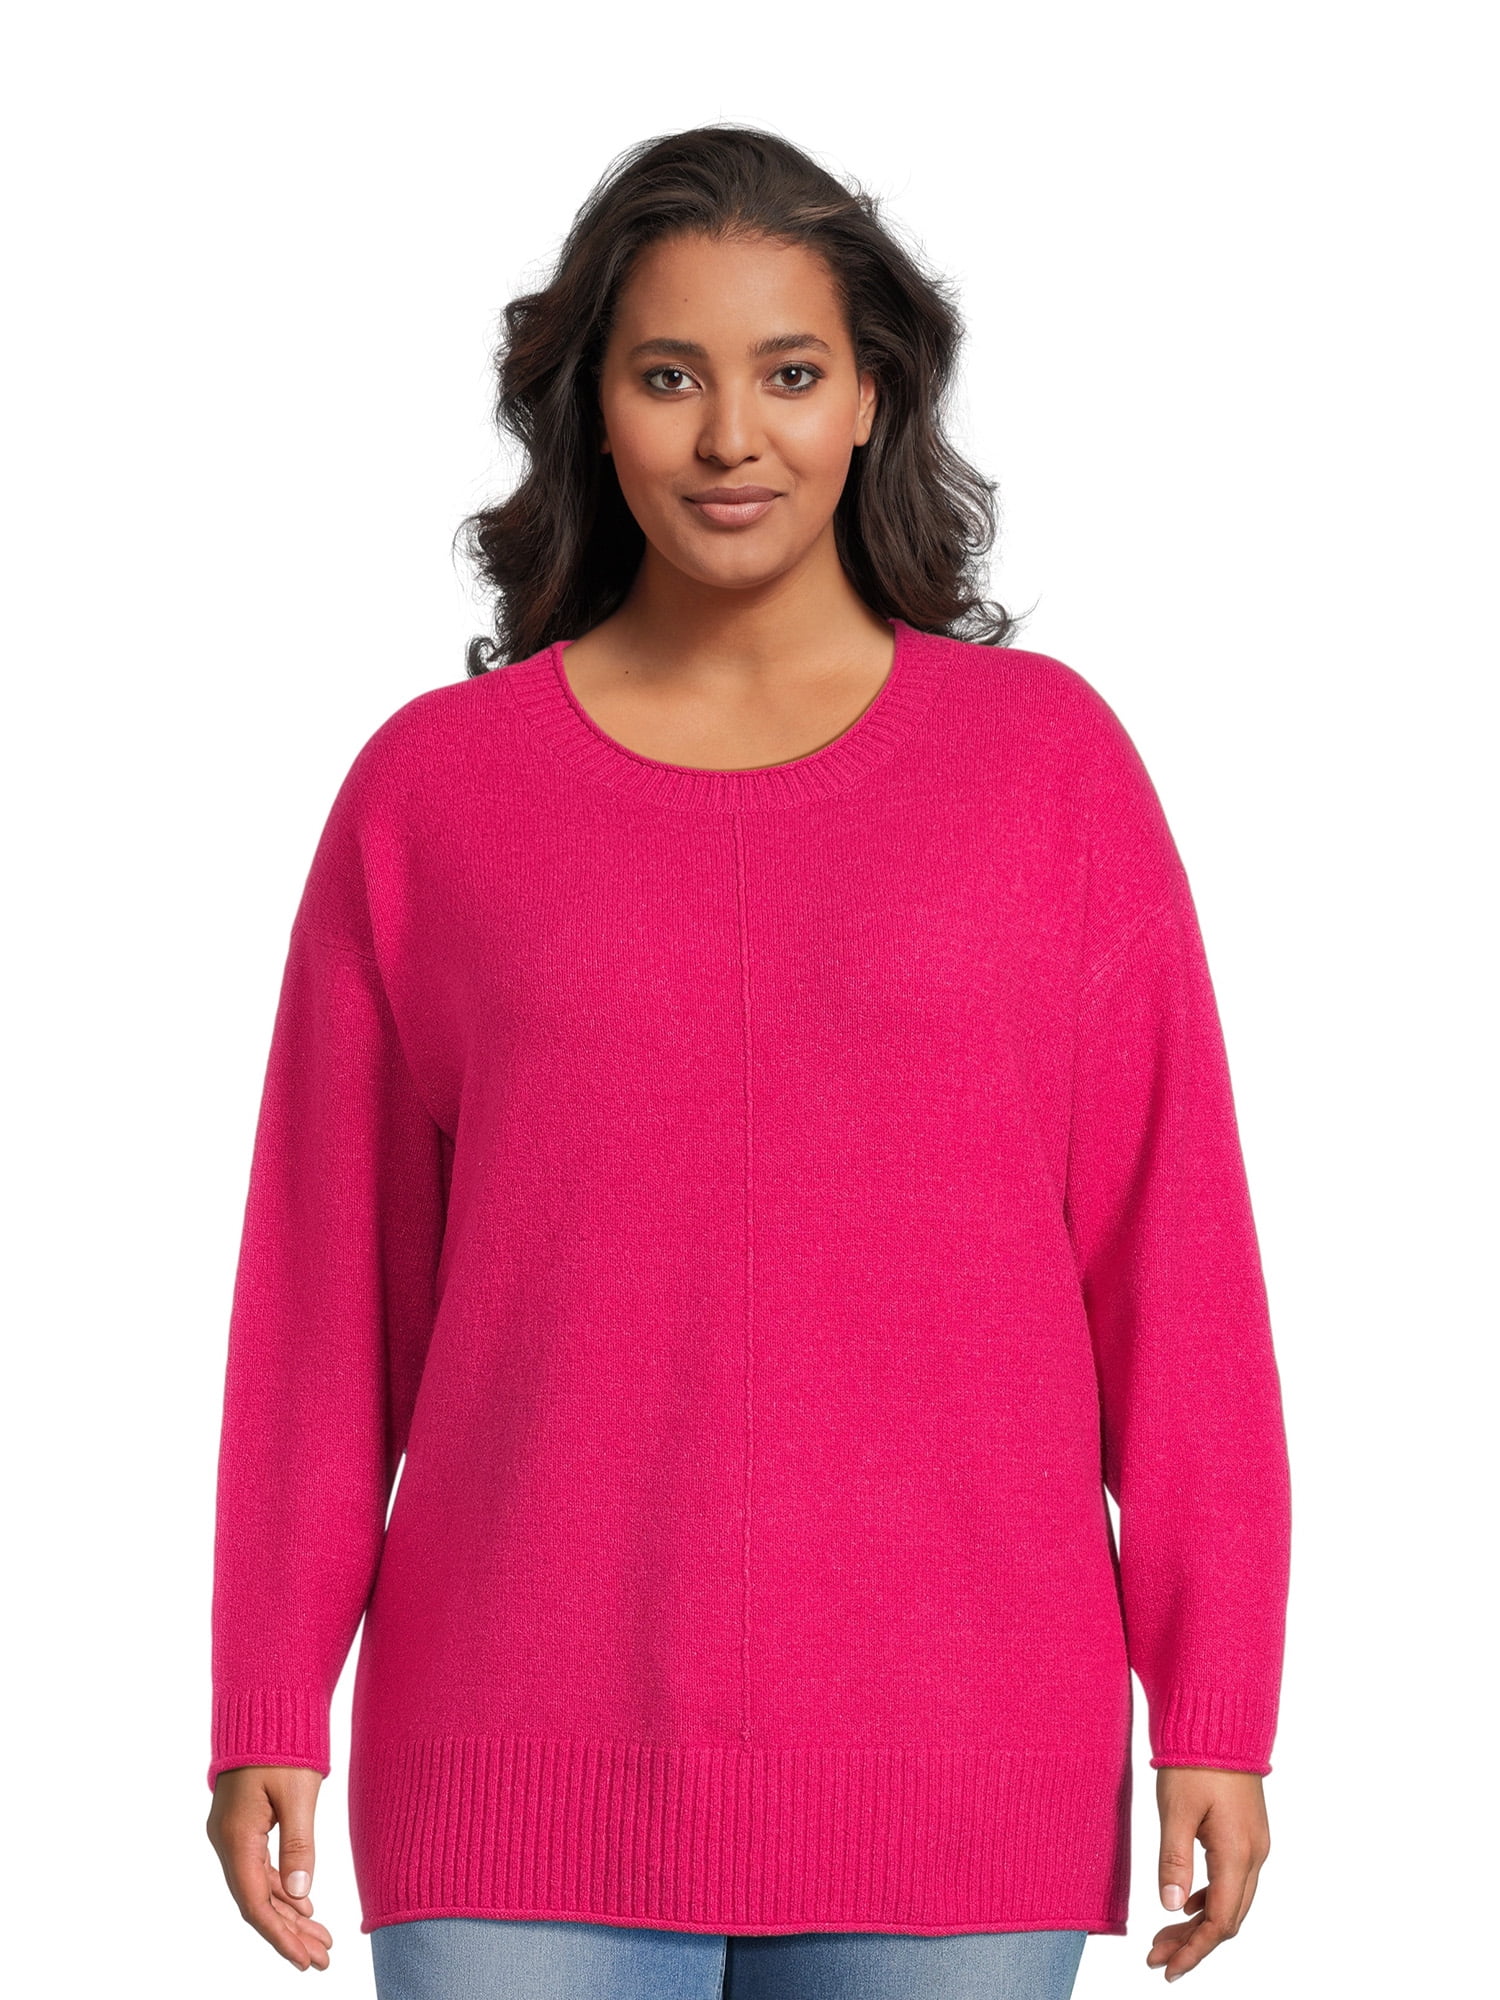 Terra And Sky Women S Plus Size Pullover Sweater With Center Seam Midweight